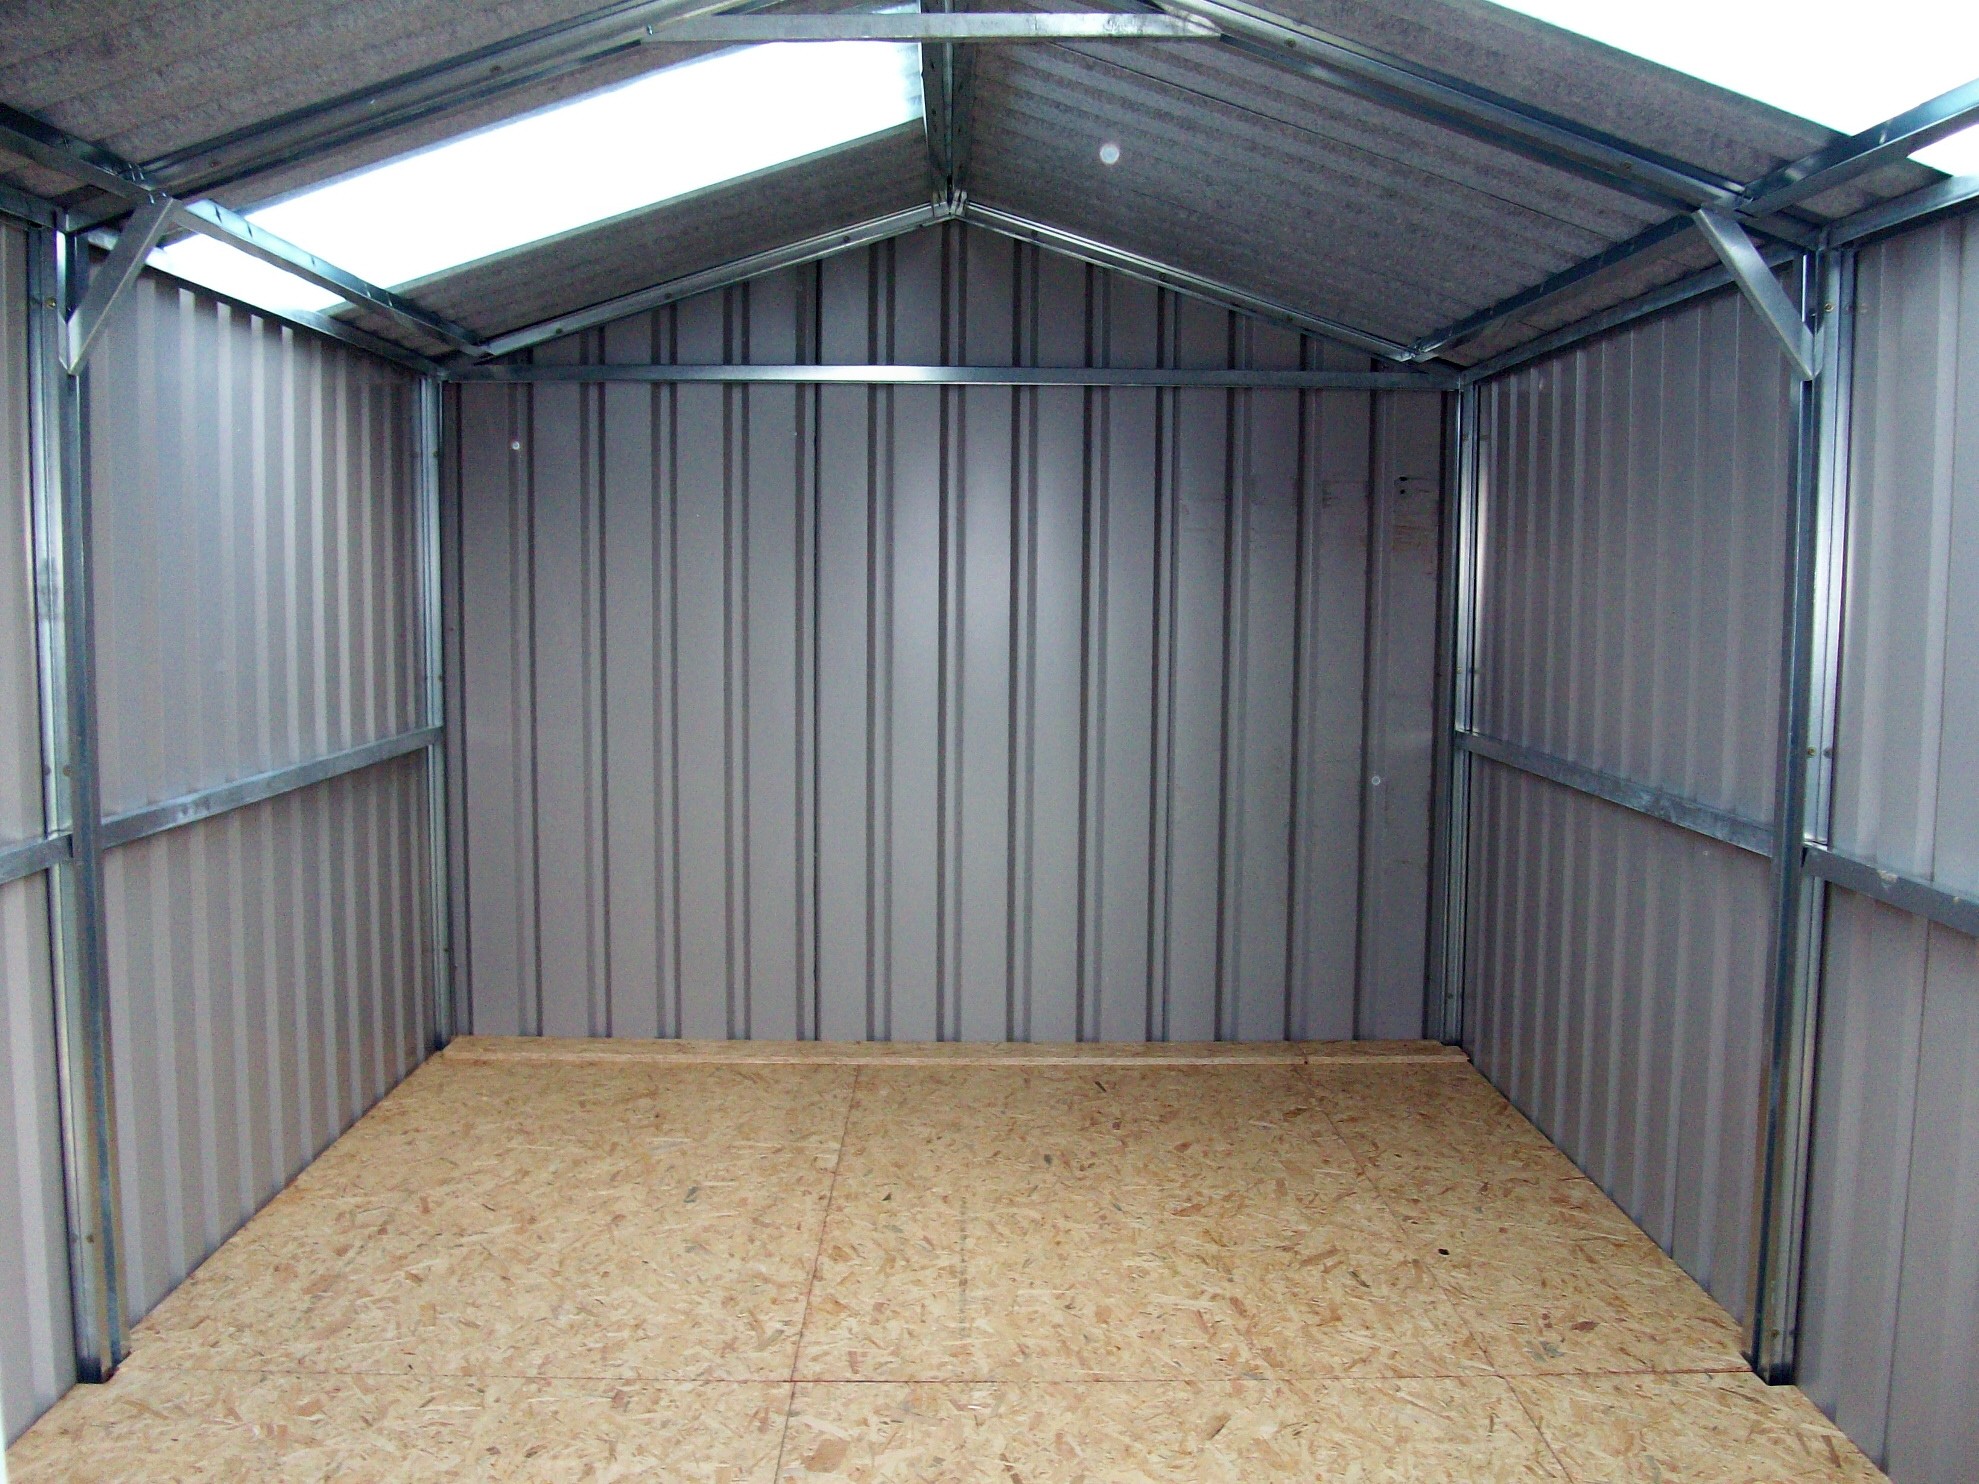 Building a Metal Shed - Is It a Good DYI Project? | ShedBuilder.info